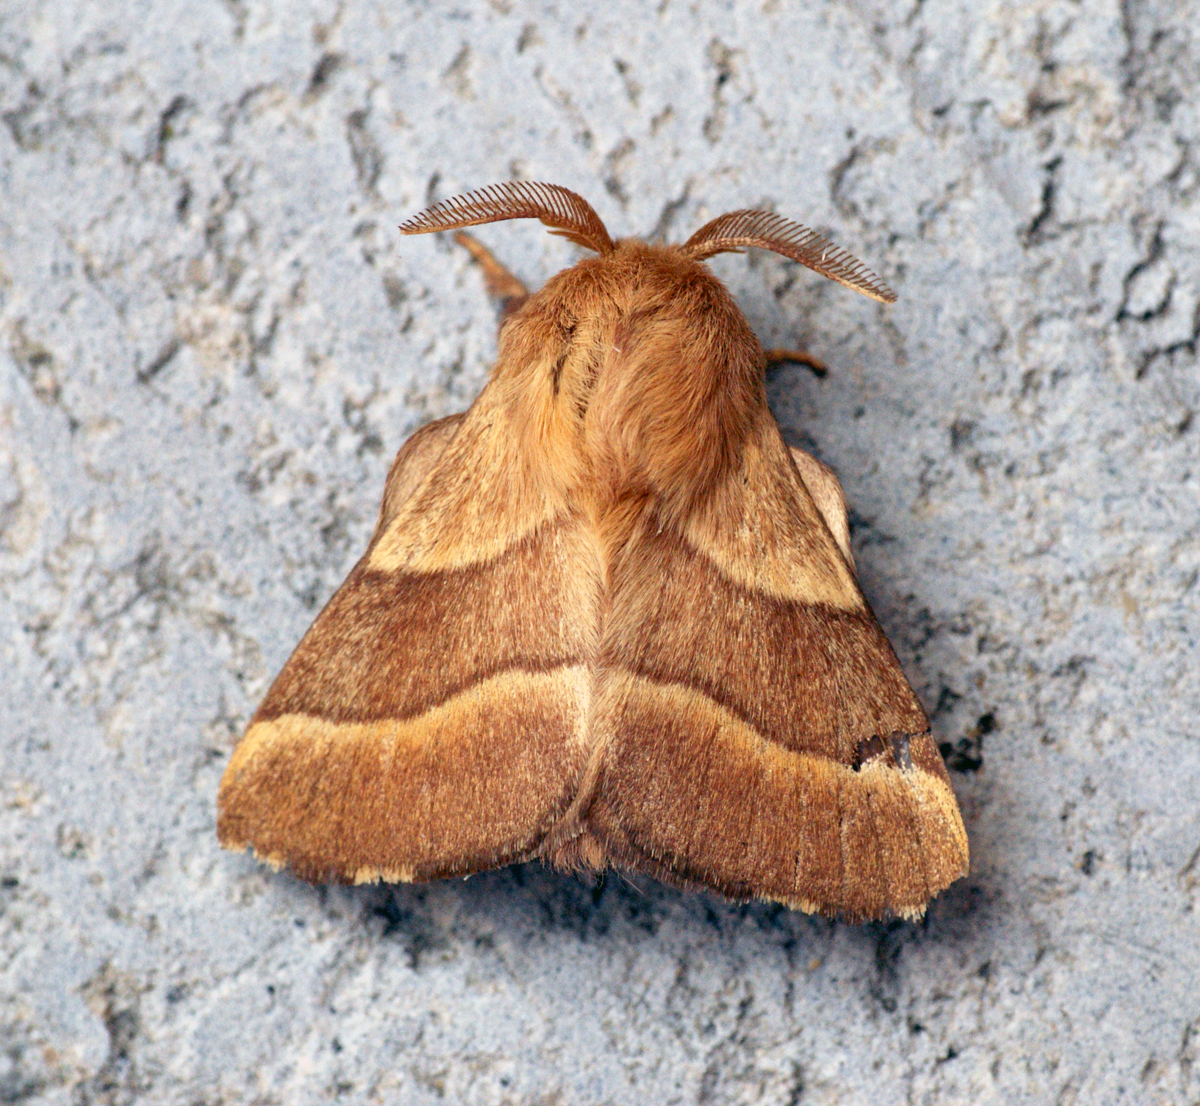 a small orange and brown erfly sitting on a surface